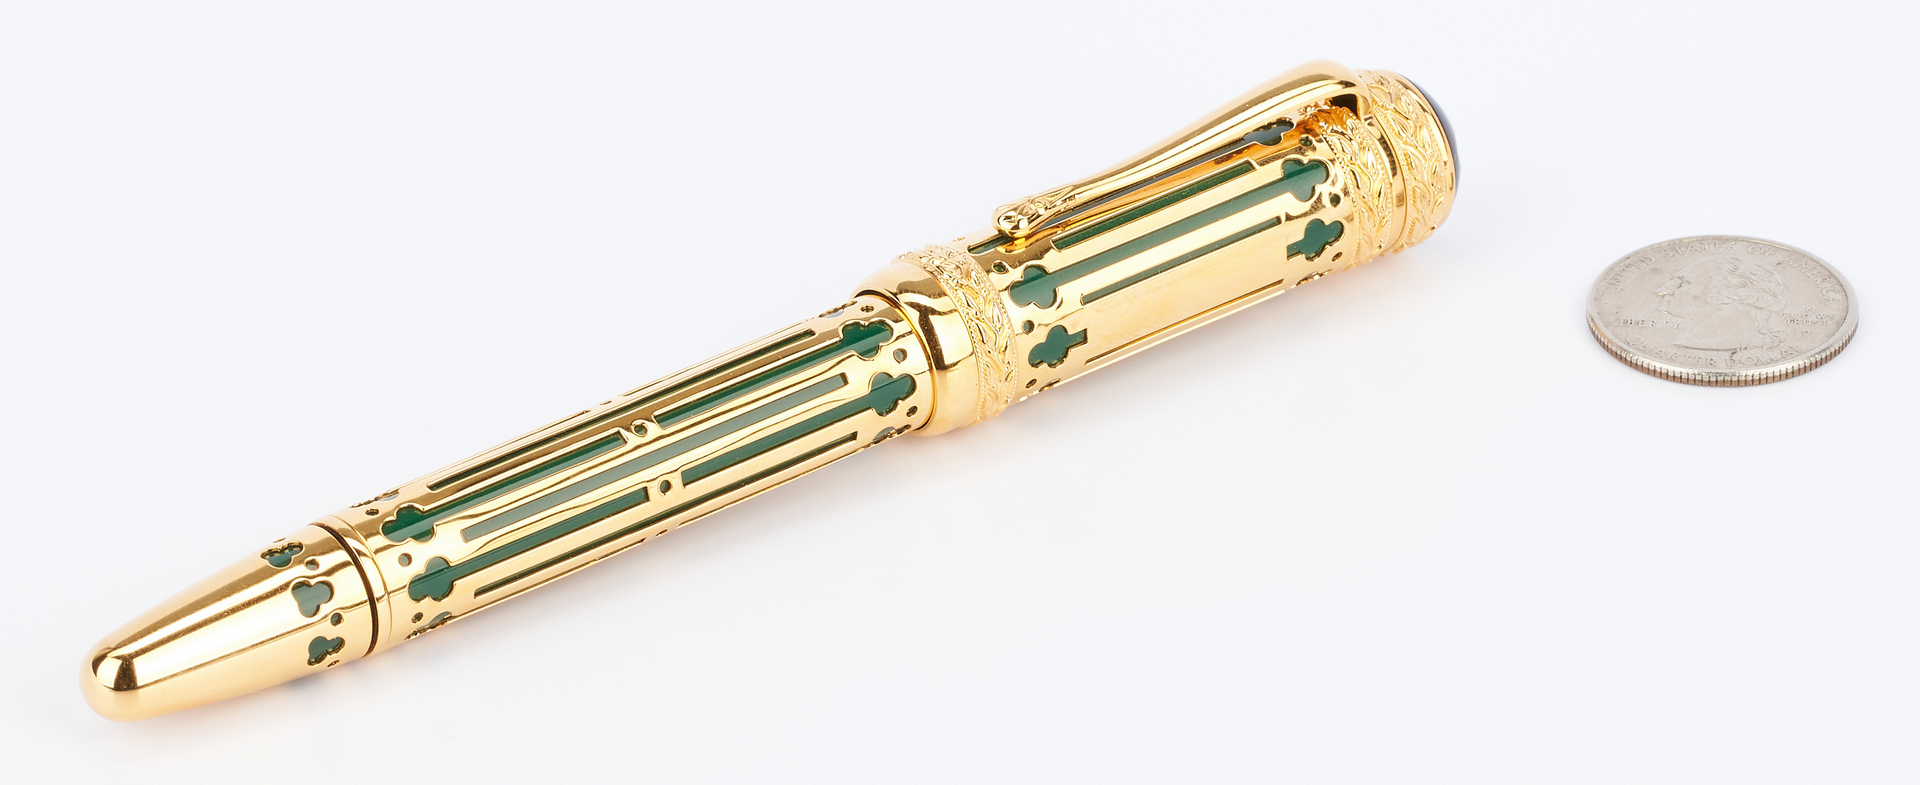 Lot 47: Montblanc Peter the Great 4810 Fountain Pen